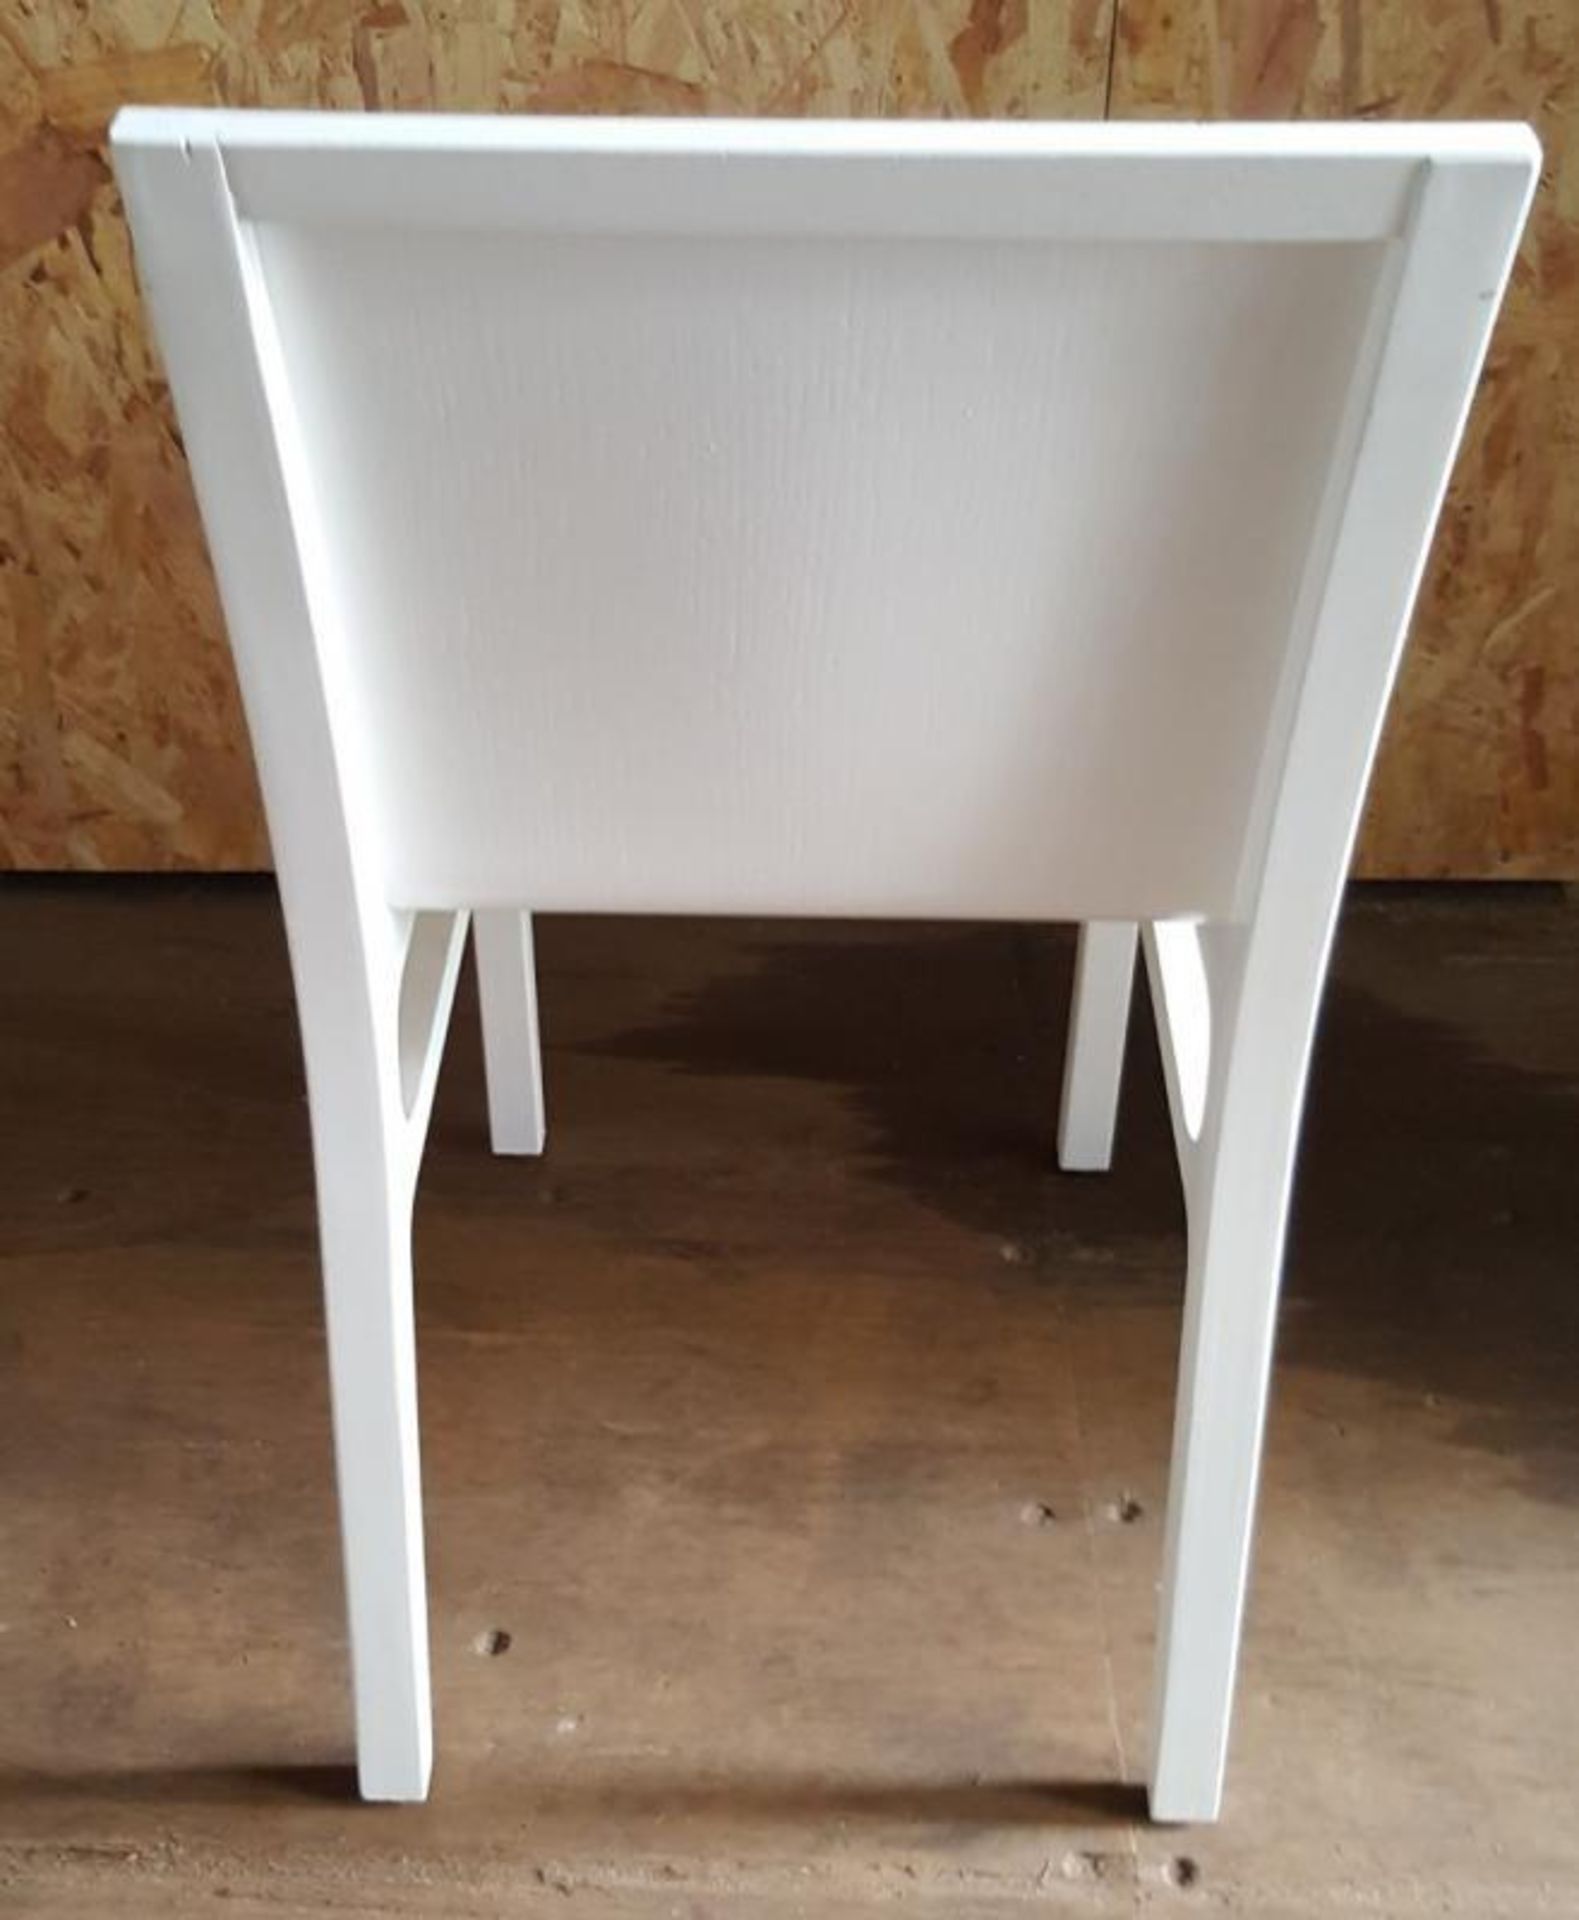 6 x Wooden Dining Chairs Set With A Bright White Finish - Dimensions: Used, In Good Condition - Ref - Image 2 of 6